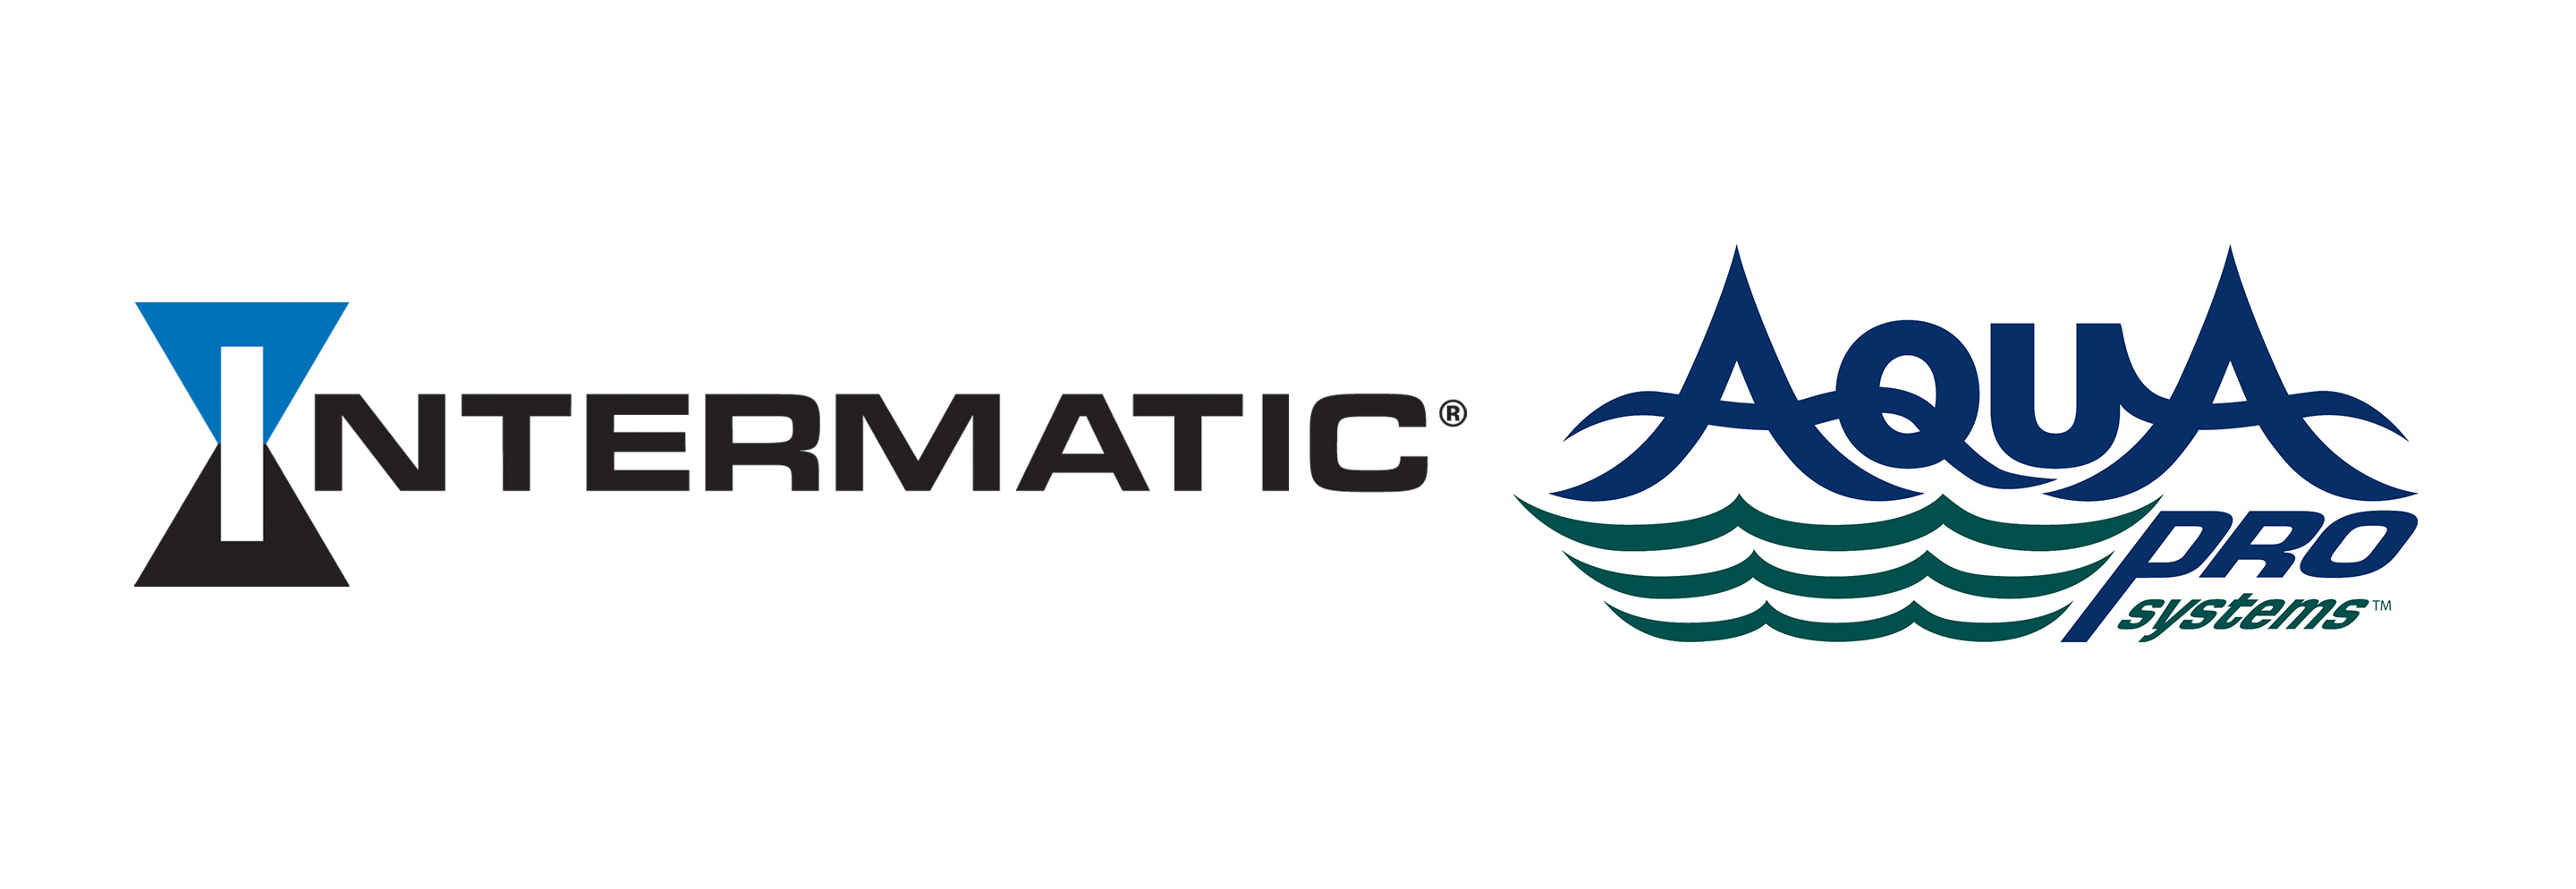 Intermatic Acquires Aquapro Systems, Expands Pool and Spa Portfolio 